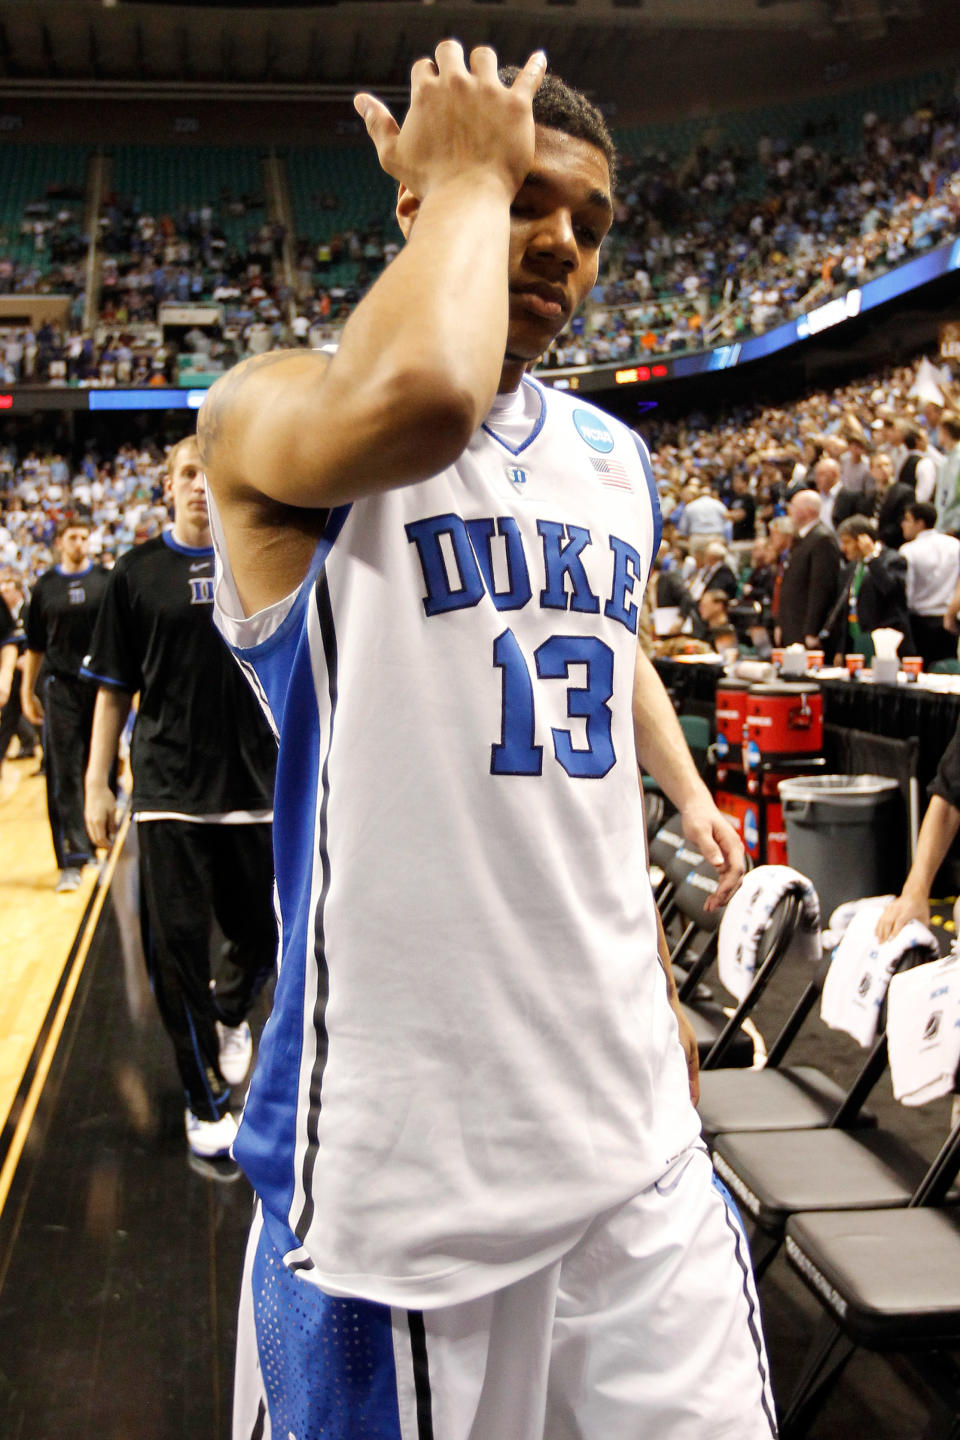 GREENSBORO, NC - MARCH 16: Michael Gbinije #13 of the Duke Blue Devils walks off the court after losing to the Lehigh Mountain Hawks 75-70 during the second round of the 2012 NCAA Men's Basketball Tournament at Greensboro Coliseum on March 16, 2012 in Greensboro, North Carolina. (Photo by Streeter Lecka/Getty Images)